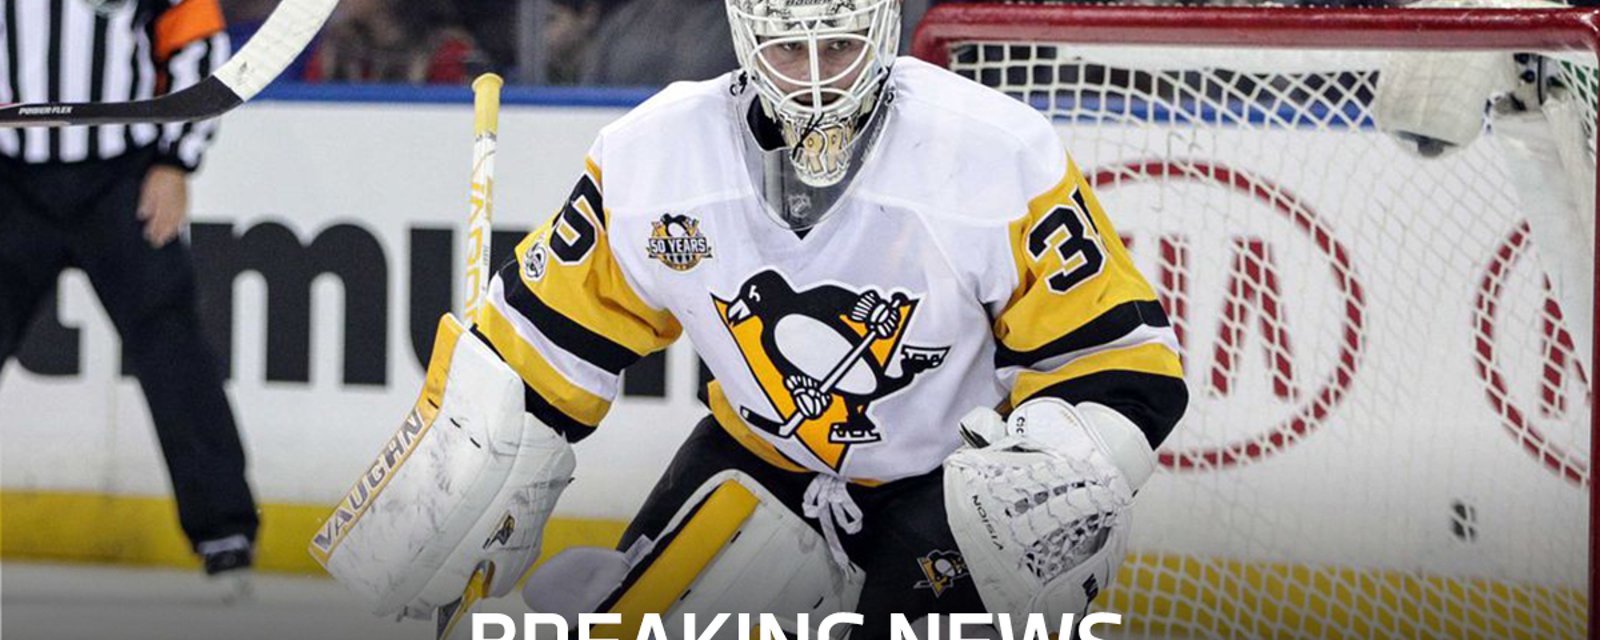 Breaking: Possible bad news for the Penguins!